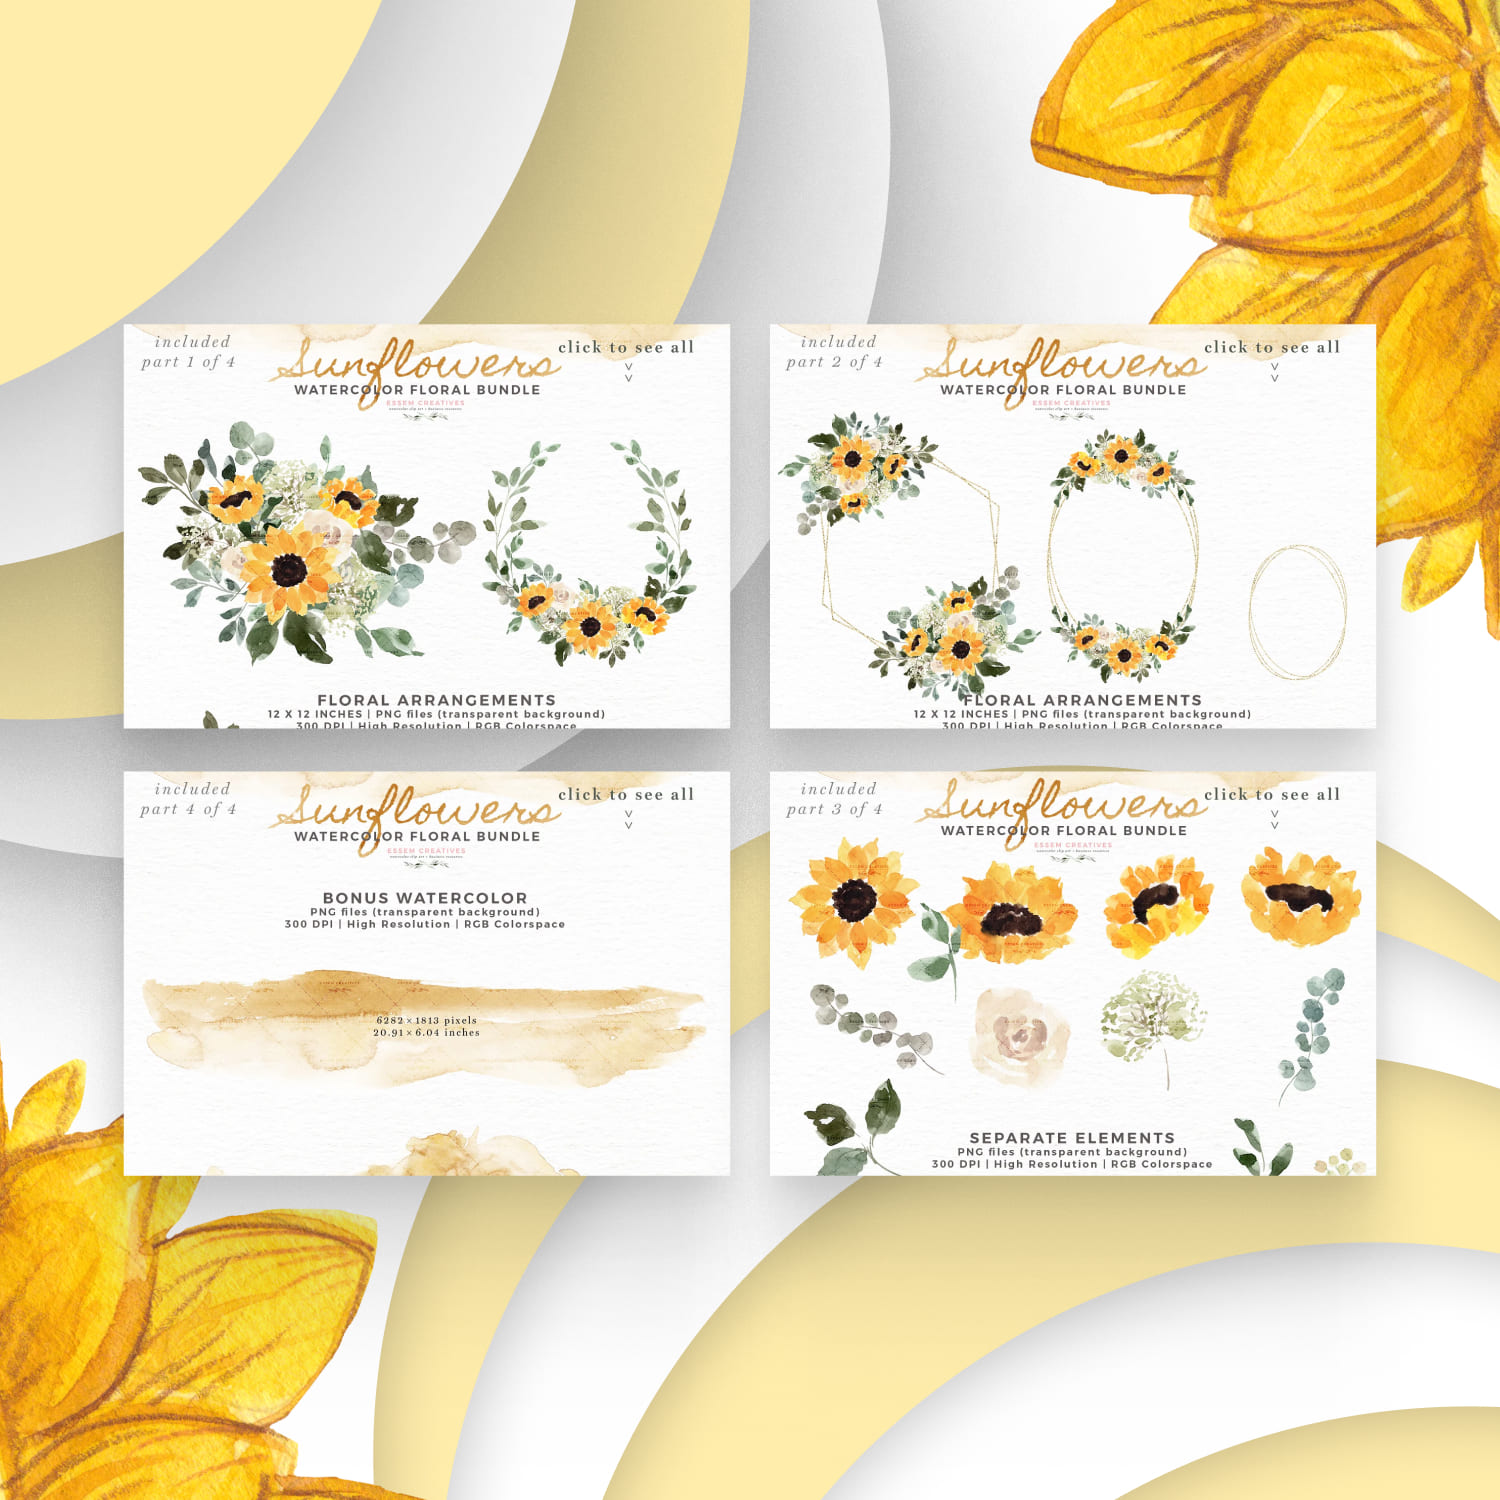 Watercolor Sunflowers Clipart Rustic cover.